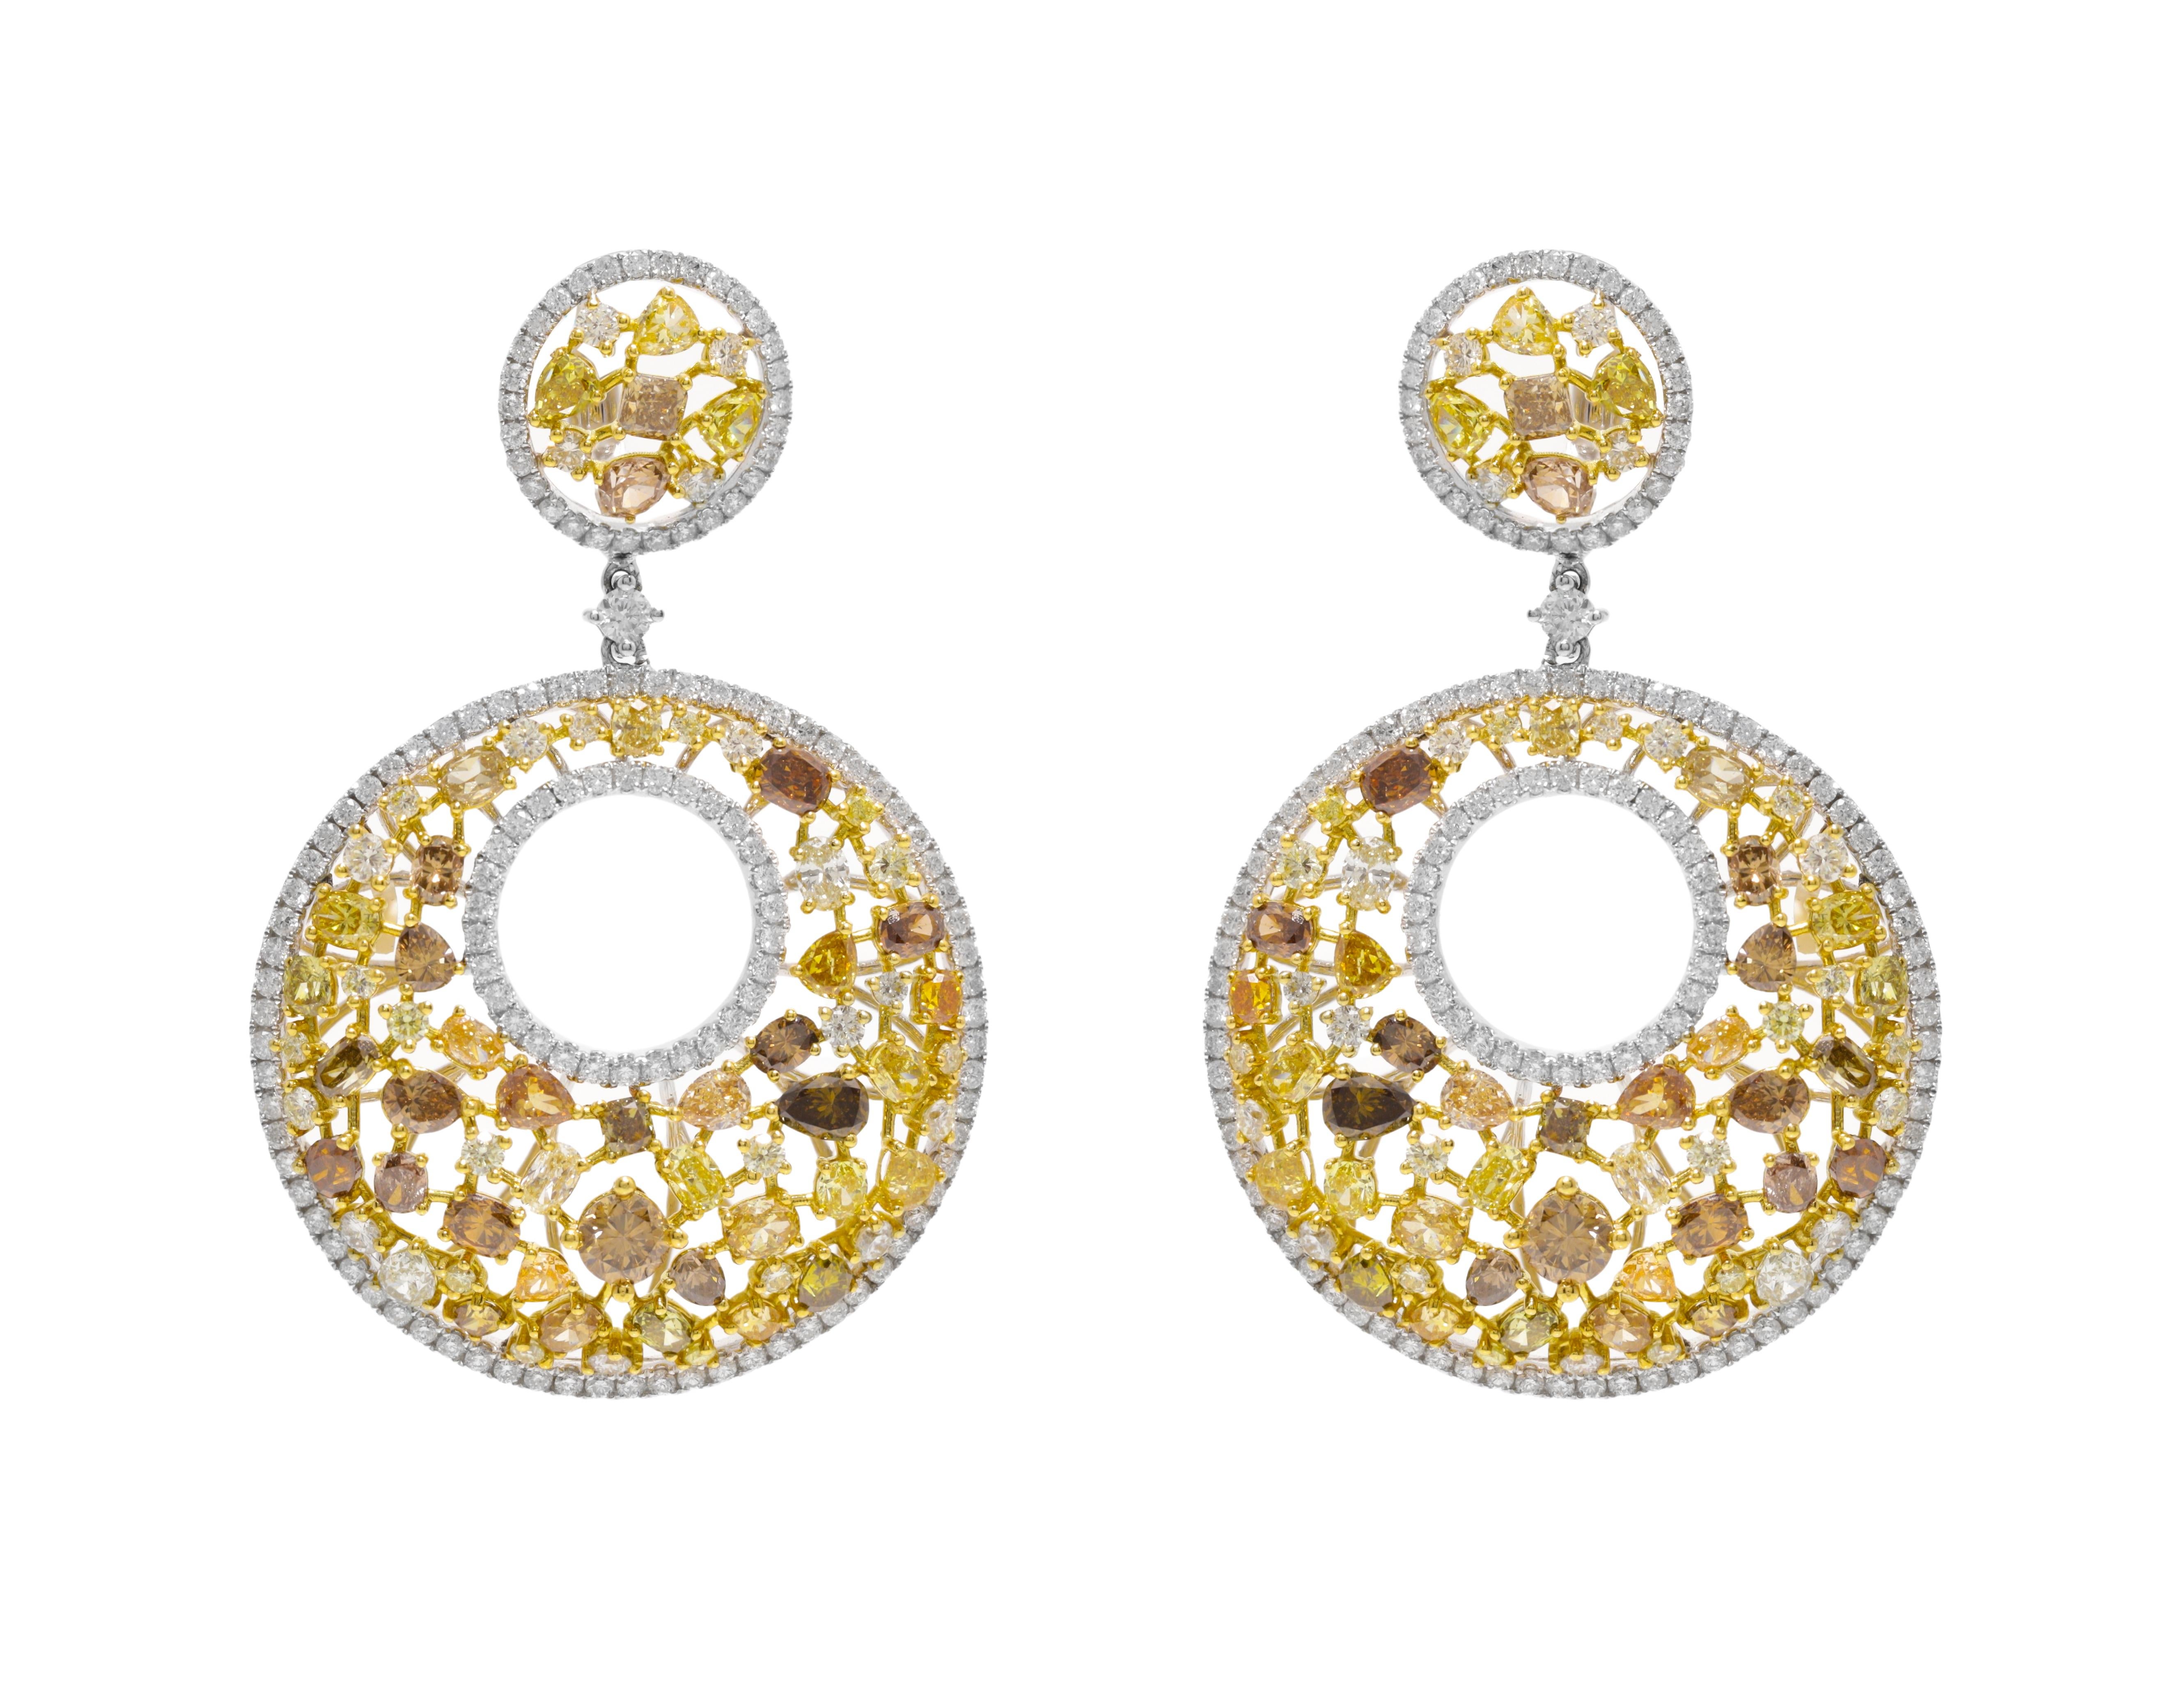 18 kt white gold diamond earrings containing 13.50 cts tw of white and yellow diamond.
Diana M. is a leading supplier of top-quality fine jewelry for over 35 years.
Diana M is one-stop shop for all your jewelry shopping, carrying line of diamond